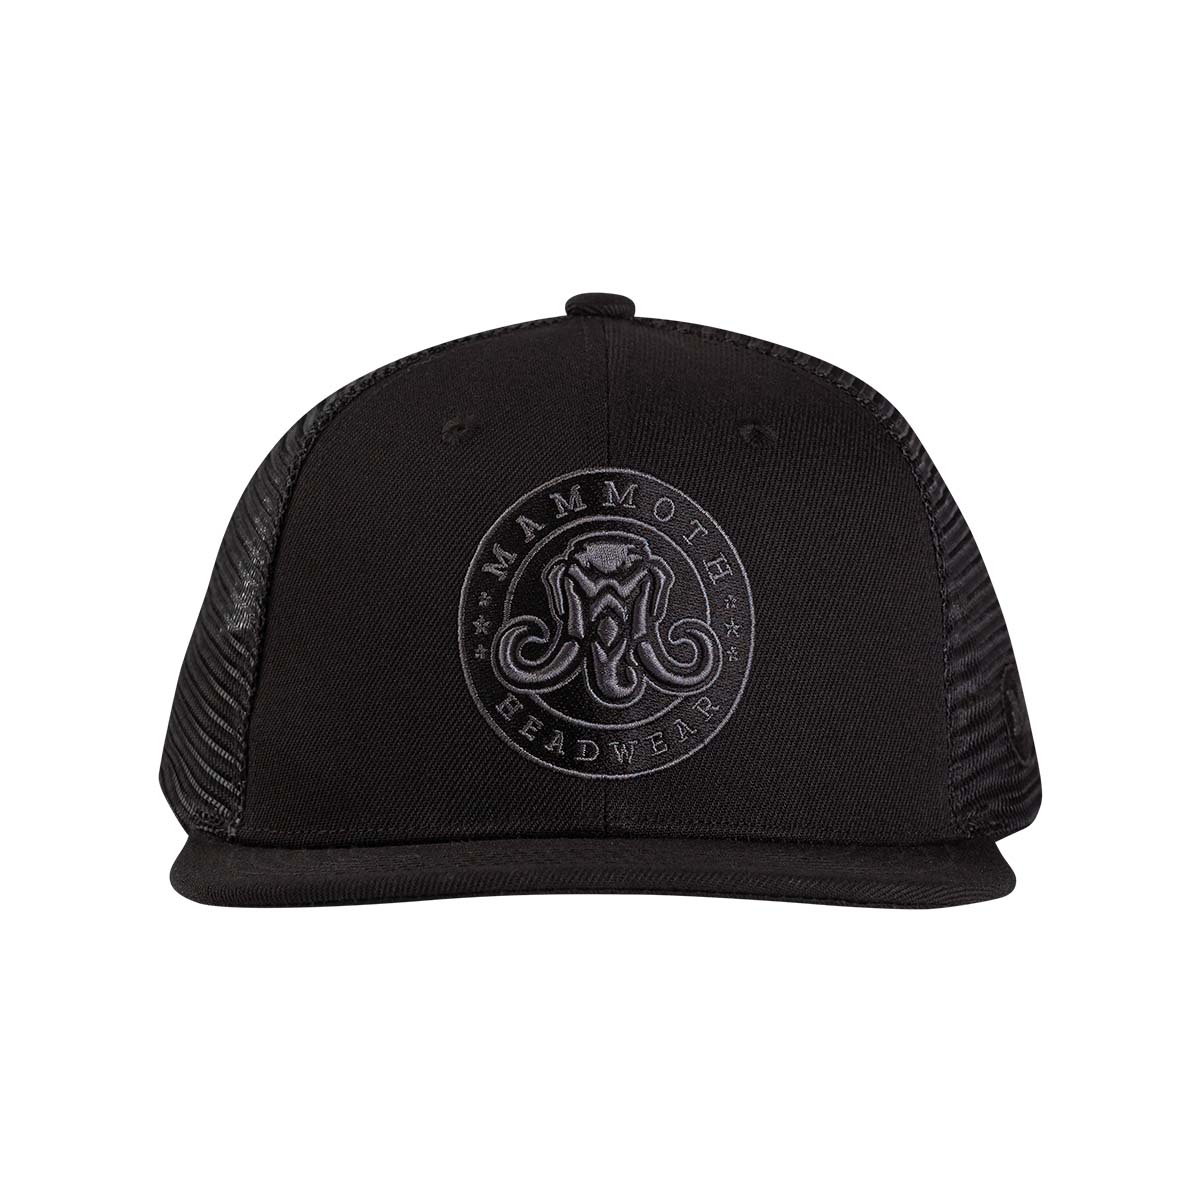 XXL Backed Out Classic Trucker Hat from Mammoth Headwear